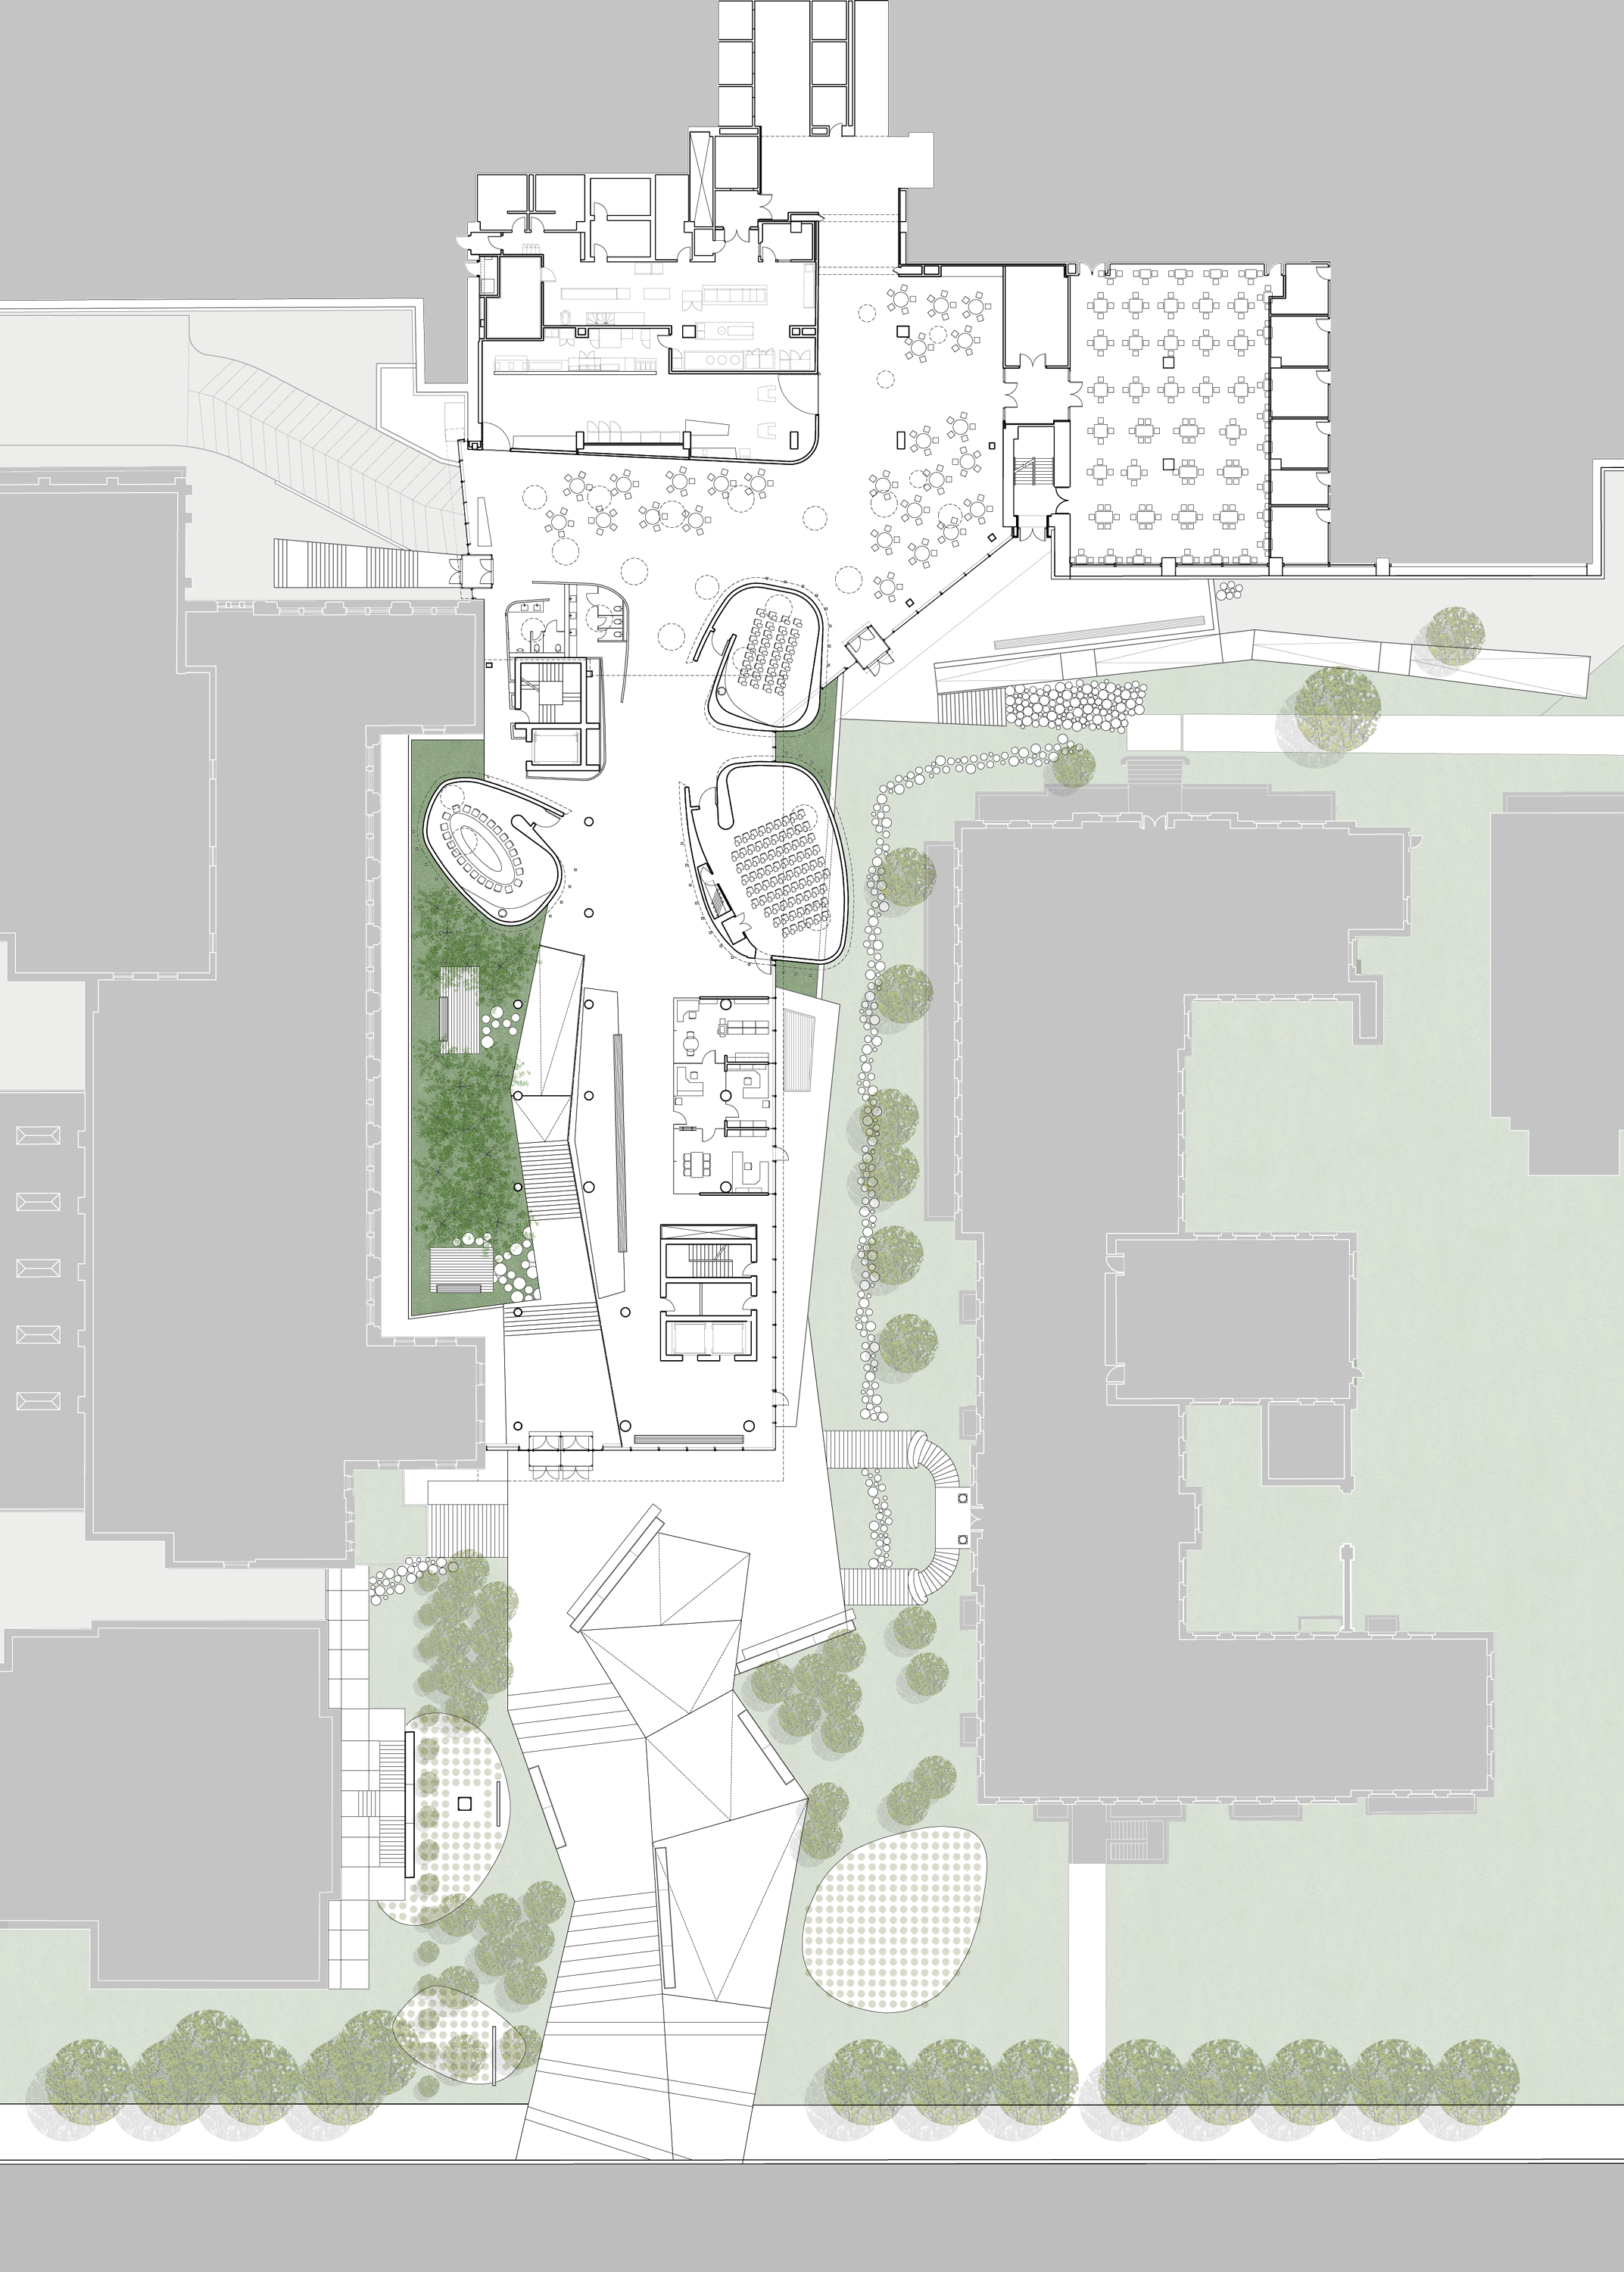 A plan diagram of the ground floor showing organic-shaped lecture halls, indoor gardens, and walkways to the street and other buildings.								